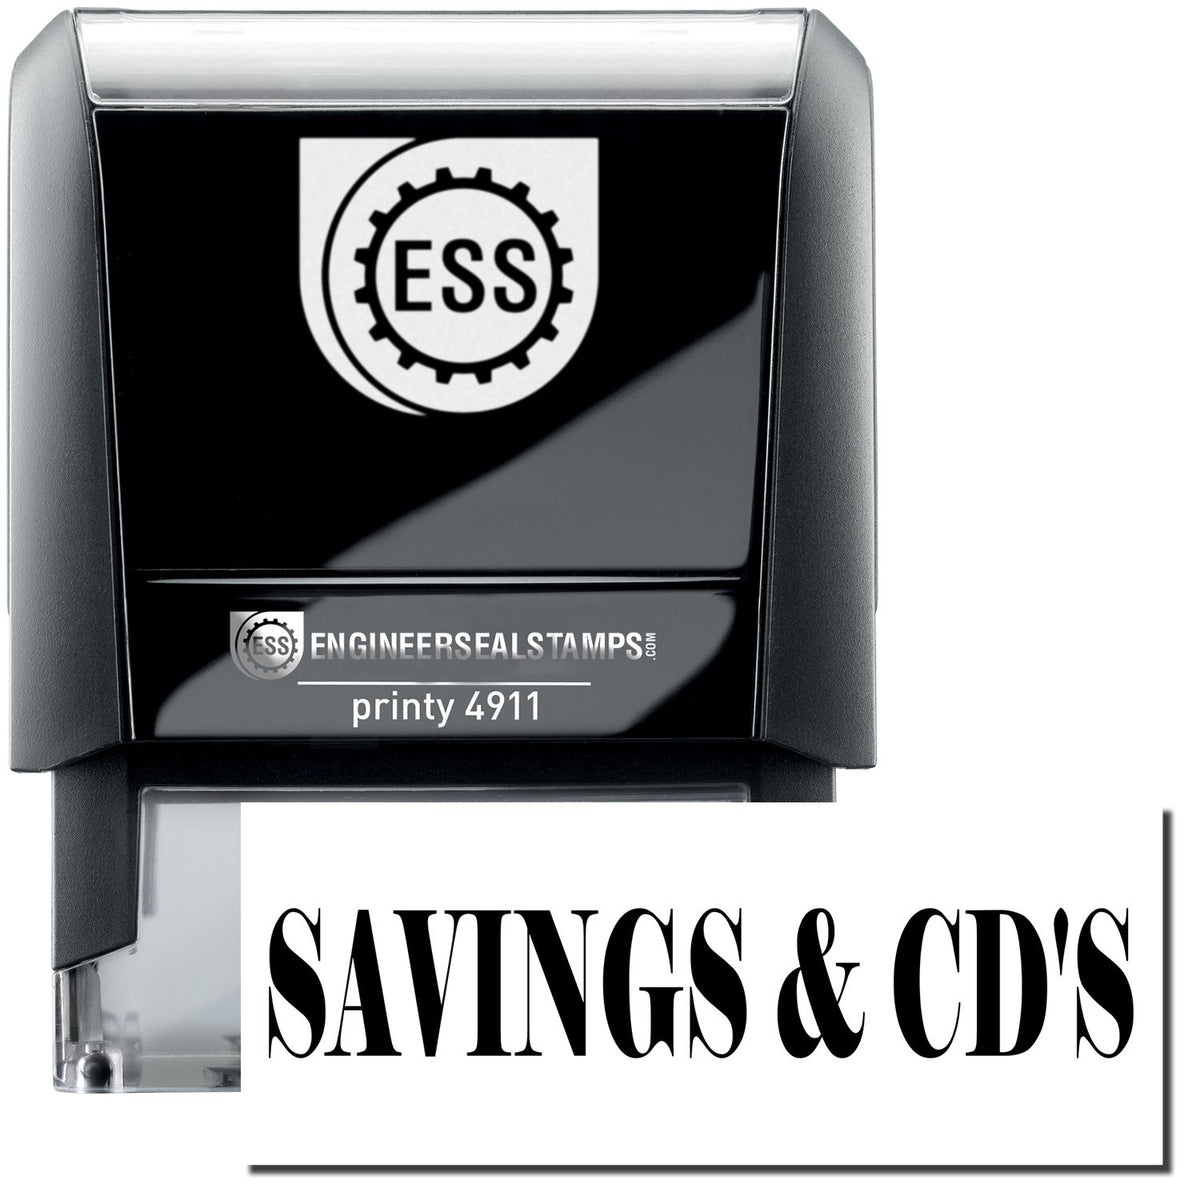 A self-inking stamp with a stamped image showing how the text &quot;SAVINGS &amp; CD&#39;S&quot; is displayed after stamping.